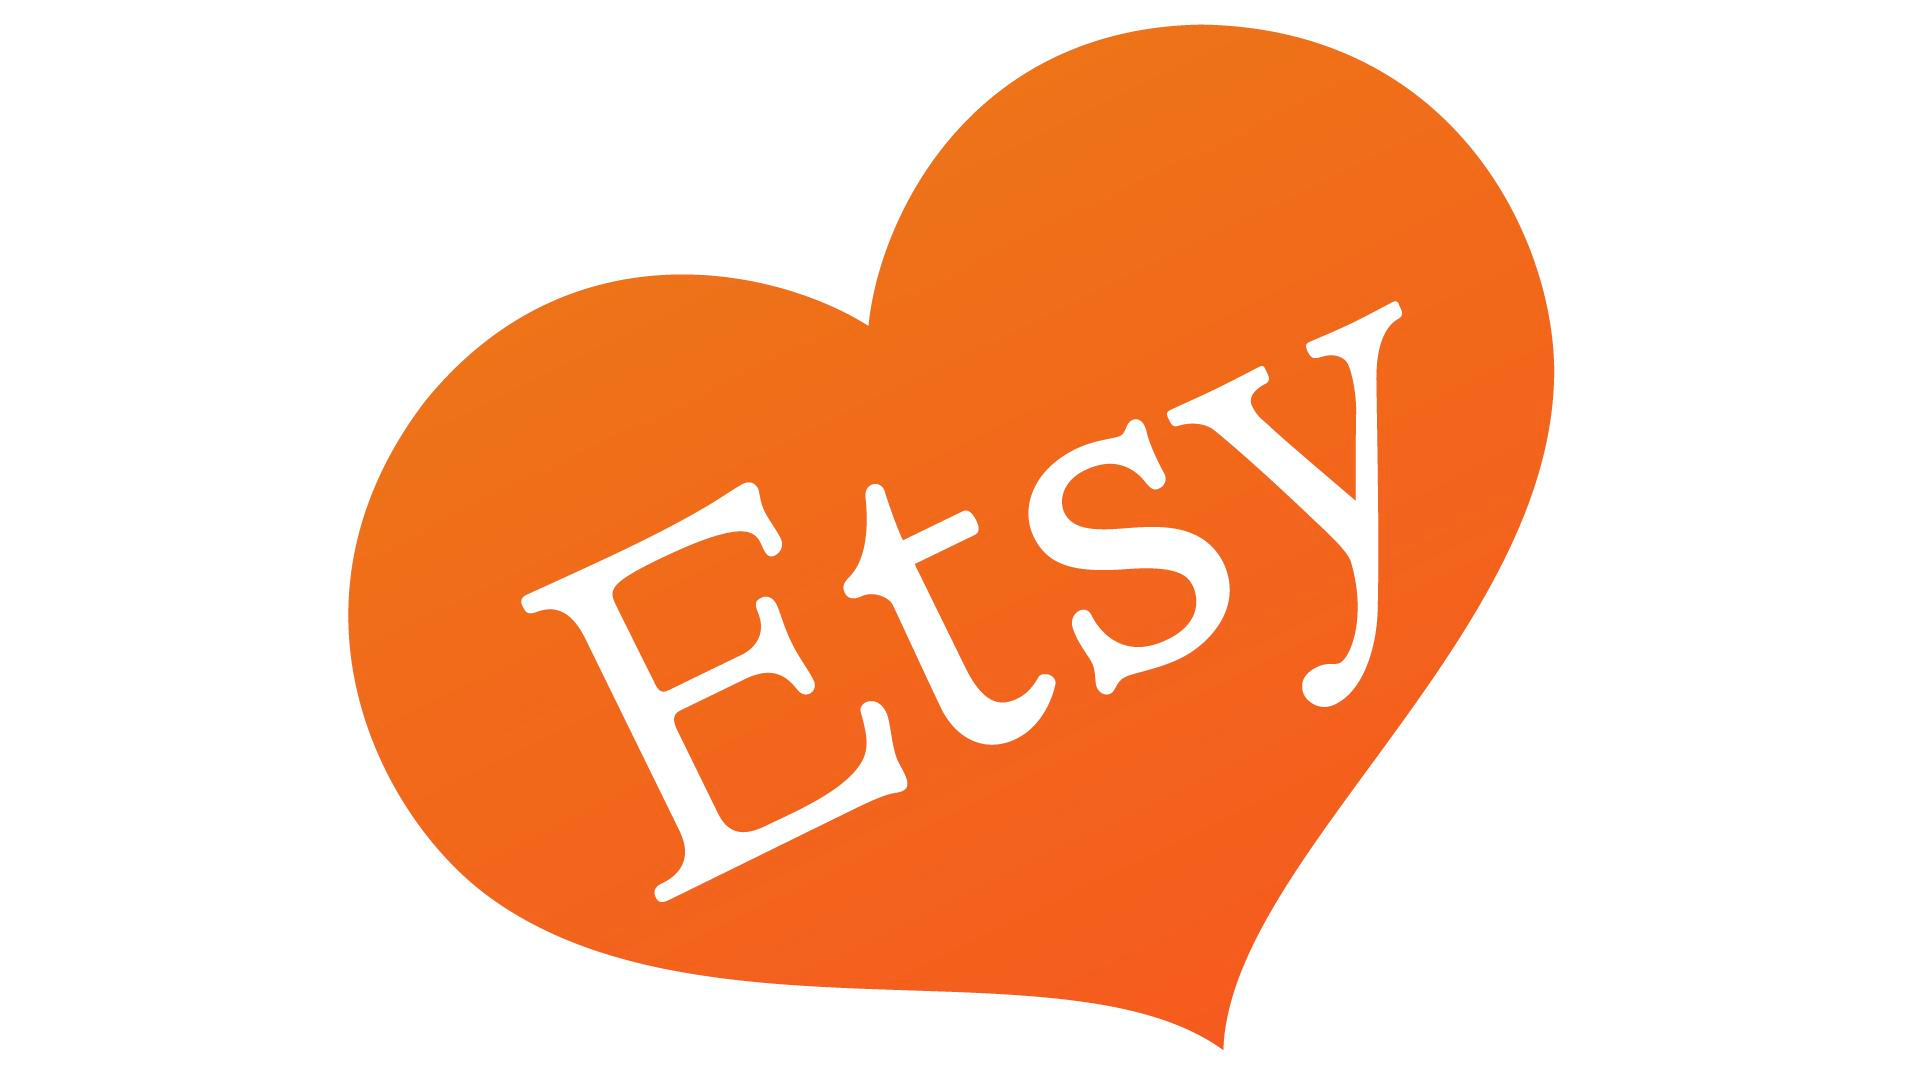 A person using Etsy Payments to pay for a purchase